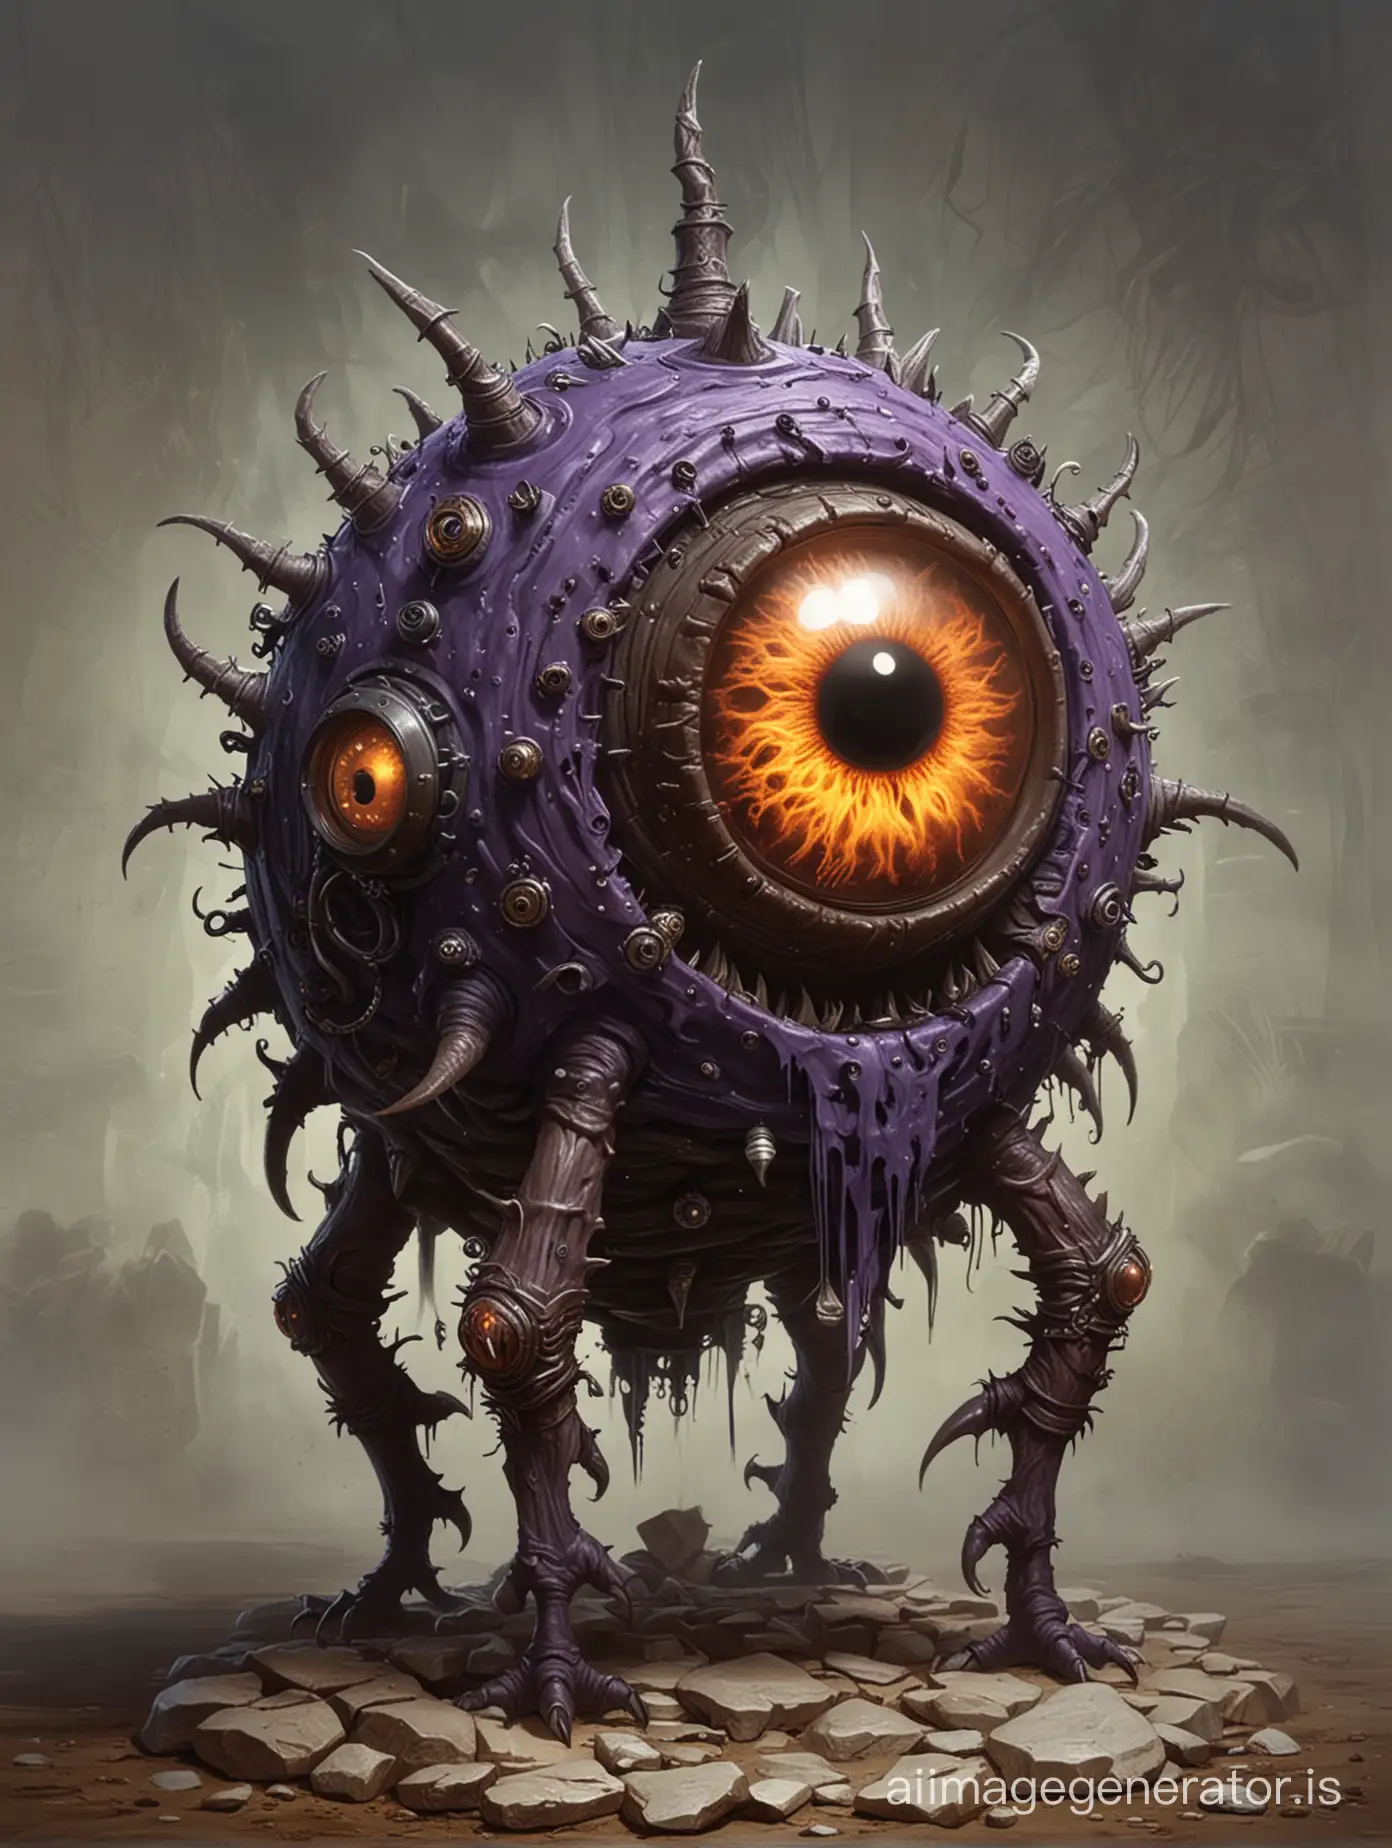 Fantasy-Dungeon-Encounter-Bewitching-Beholder-Confrontation